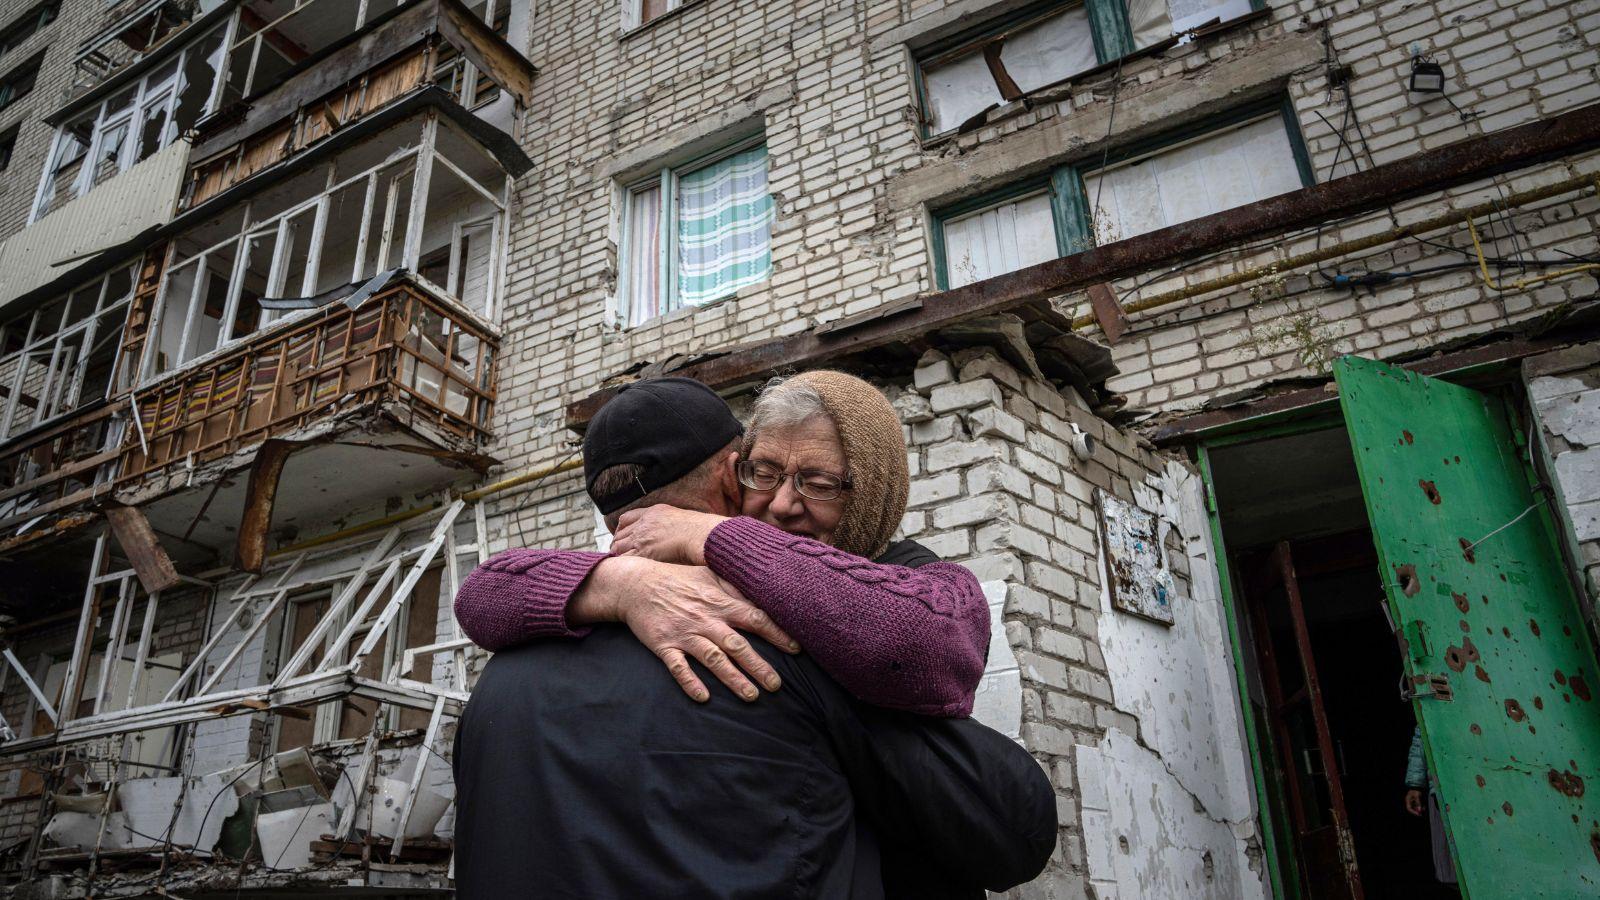 Yevdokia, 65, hugs her son Alexander in front of their house, which was heavily damaged by Russia attack, in the retaken area of Izium, Ukraine, on Sept. 14, 2022.